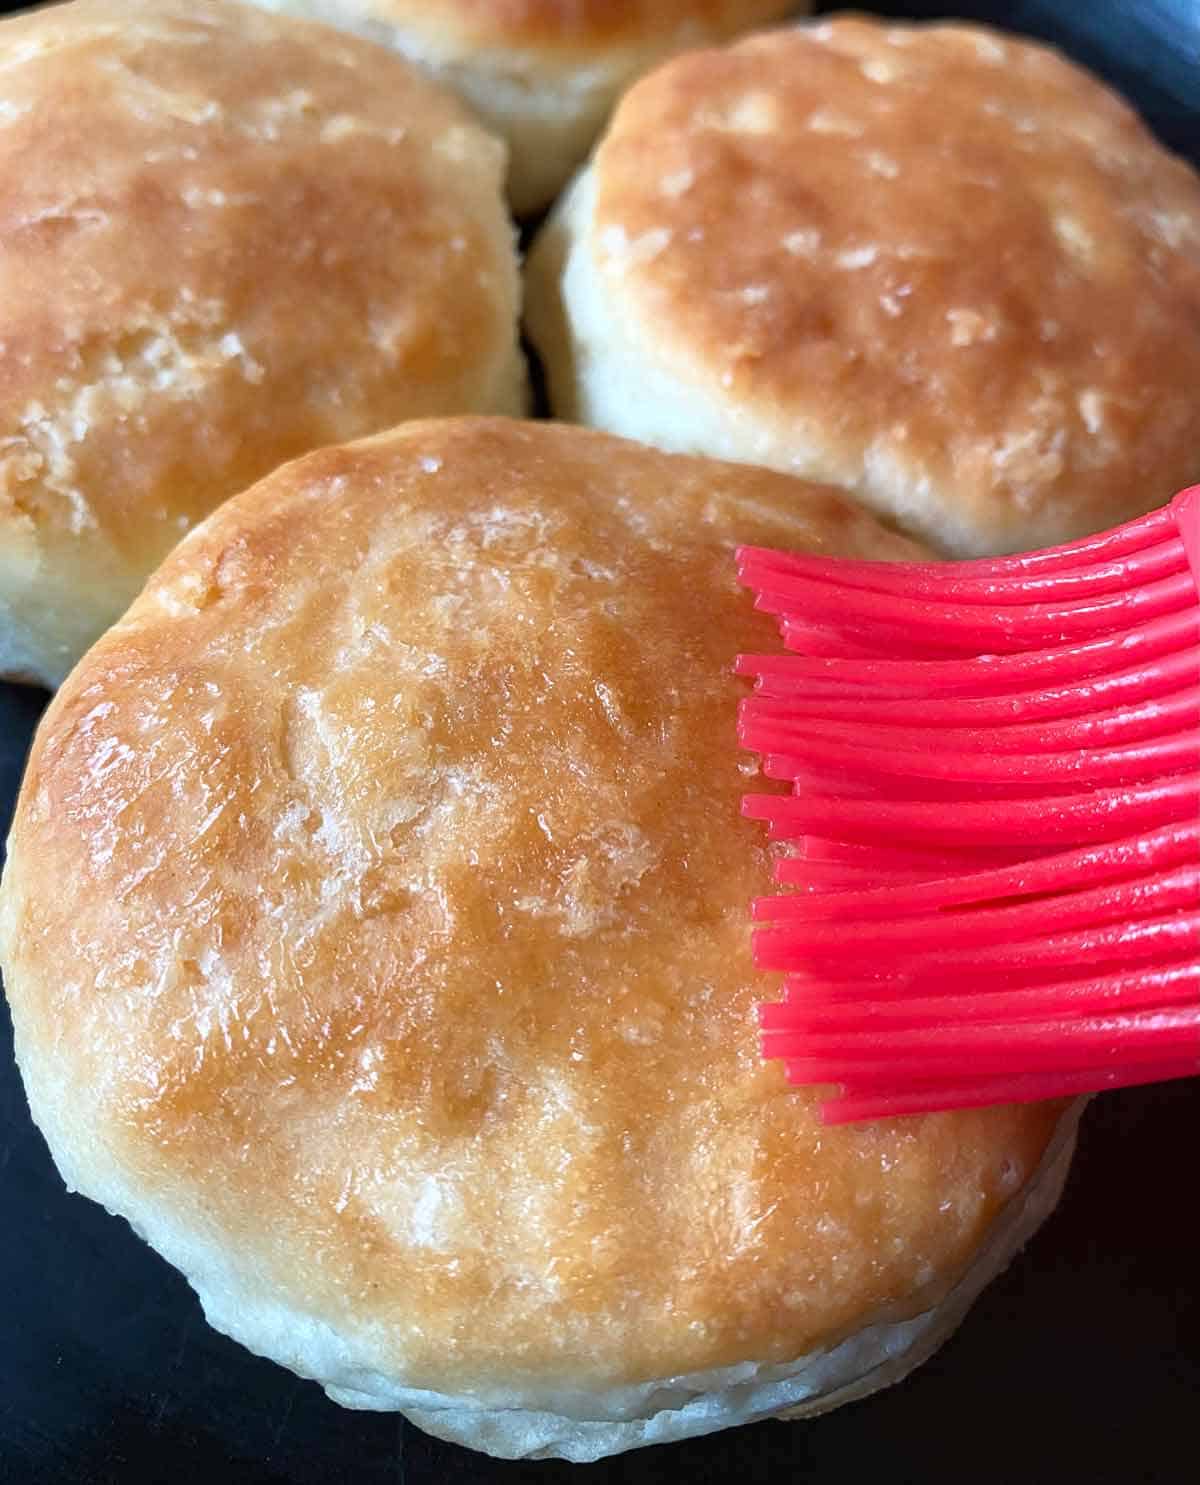 Brushing warm biscuits with melted butter using a red pastry brush.